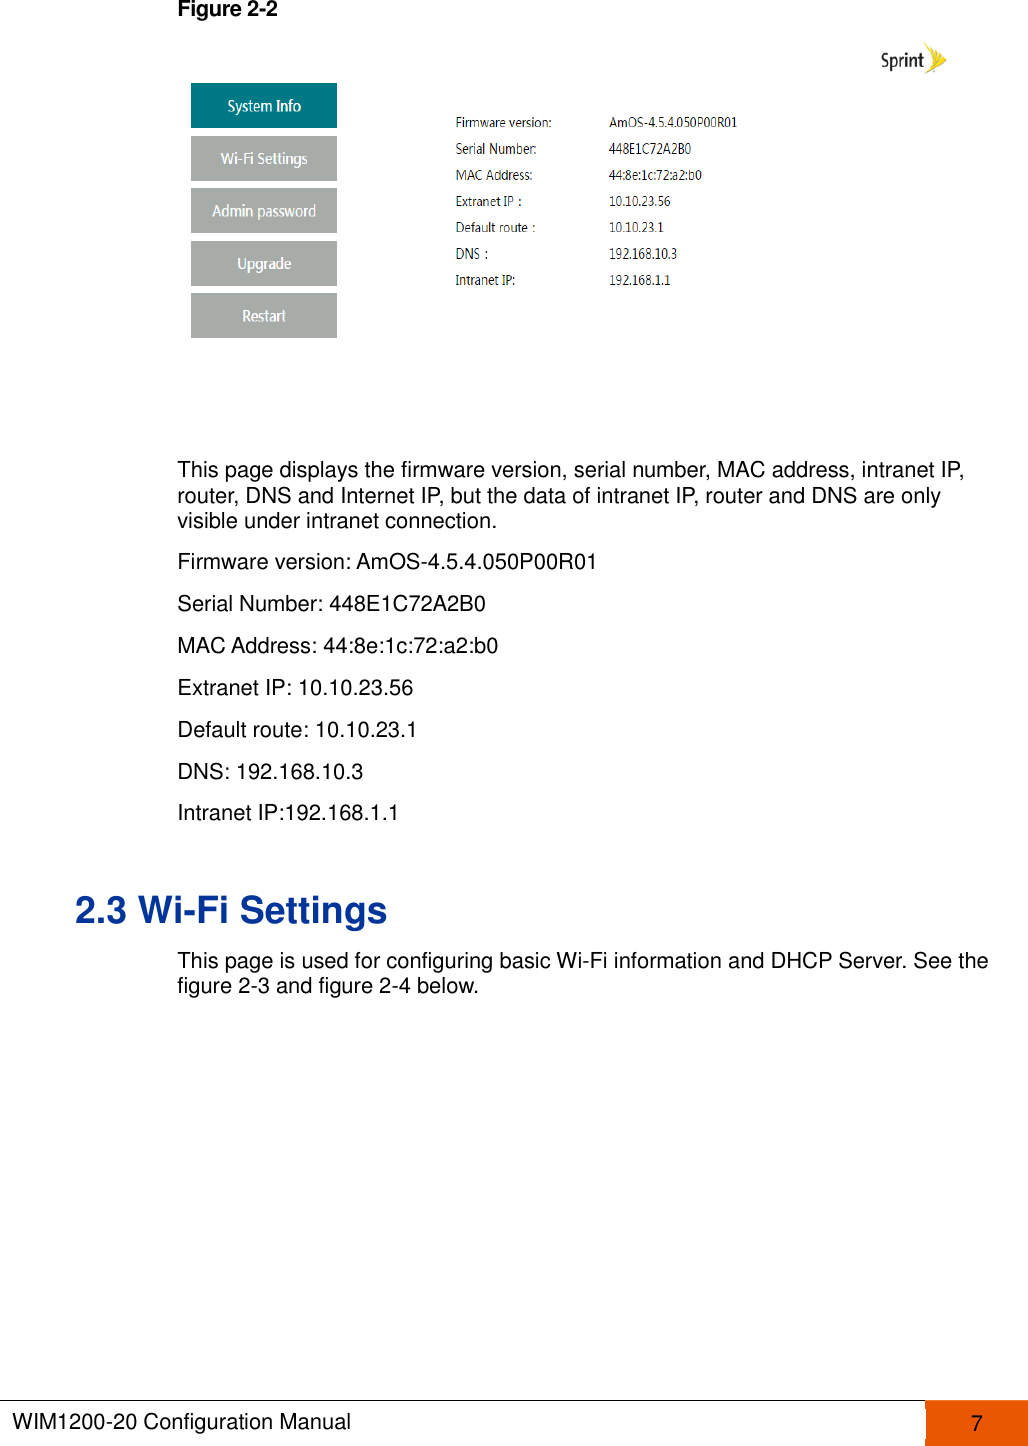  WIM1200-20 Configuration Manual   7  Figure 2-2   This page displays the firmware version, serial number, MAC address, intranet IP, router, DNS and Internet IP, but the data of intranet IP, router and DNS are only visible under intranet connection.   Firmware version: AmOS-4.5.4.050P00R01 Serial Number: 448E1C72A2B0 MAC Address: 44:8e:1c:72:a2:b0 Extranet IP: 10.10.23.56 Default route: 10.10.23.1 DNS: 192.168.10.3 Intranet IP:192.168.1.1 2.3 Wi-Fi Settings This page is used for configuring basic Wi-Fi information and DHCP Server. See the figure 2-3 and figure 2-4 below. 